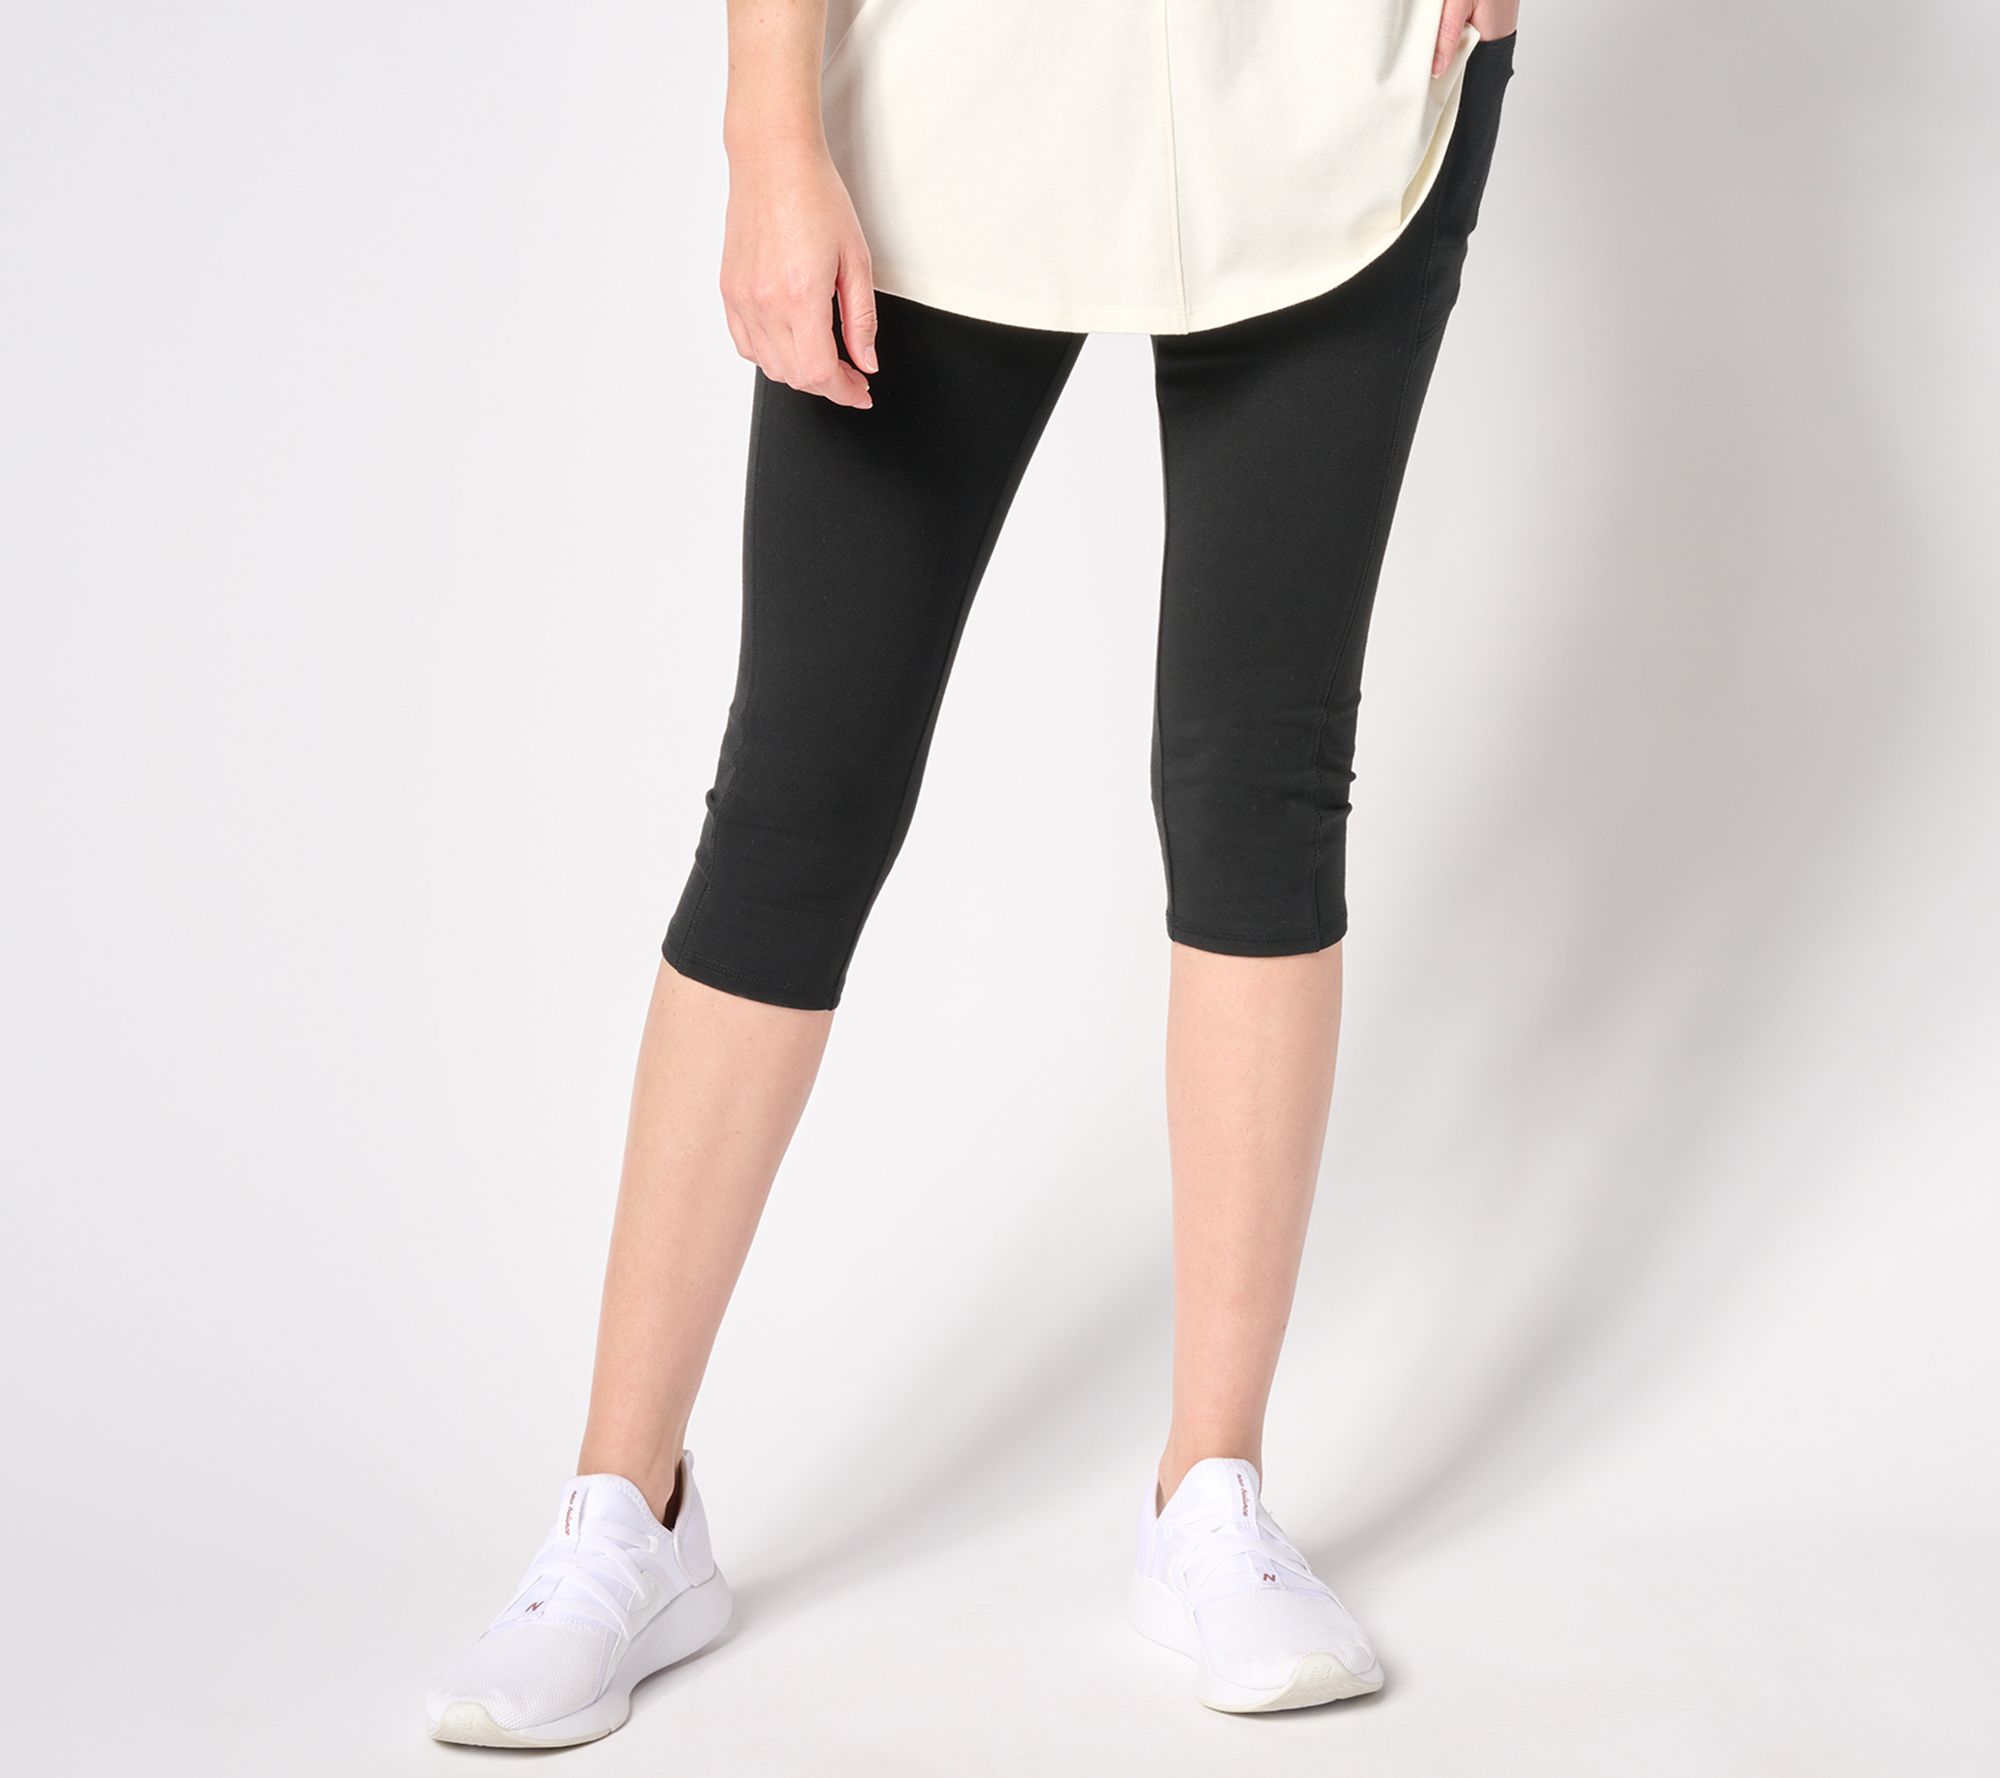 Denim & Co. Active Duo Stretch Leggings with Side Pocket on QVC